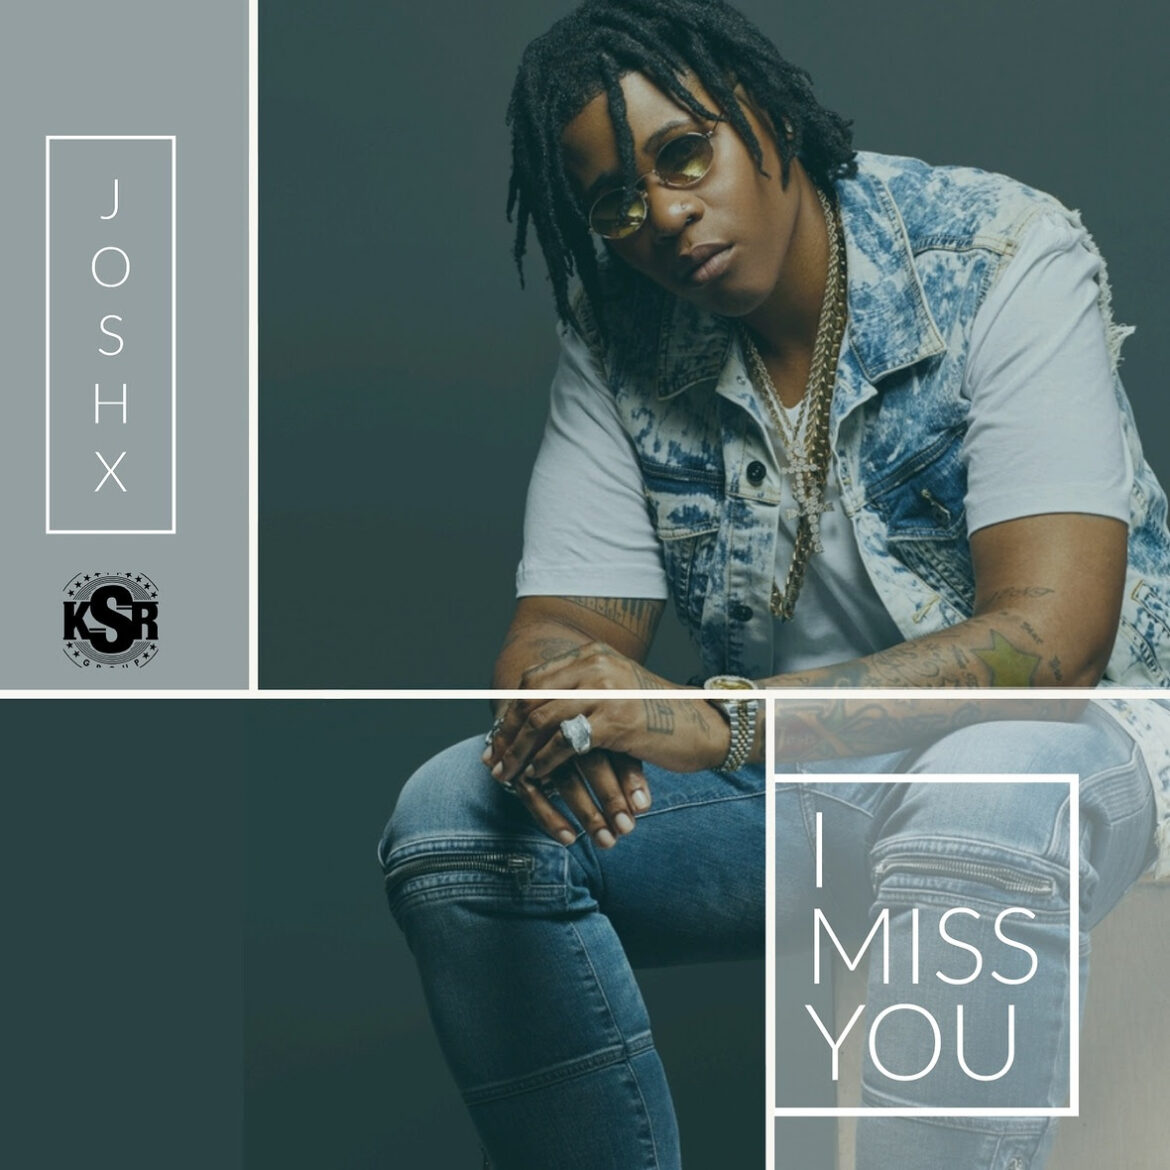 JOSH X Arrives on His First Billboard Top 20 R&B Singles with His Hit Song, “I MISS YOU”